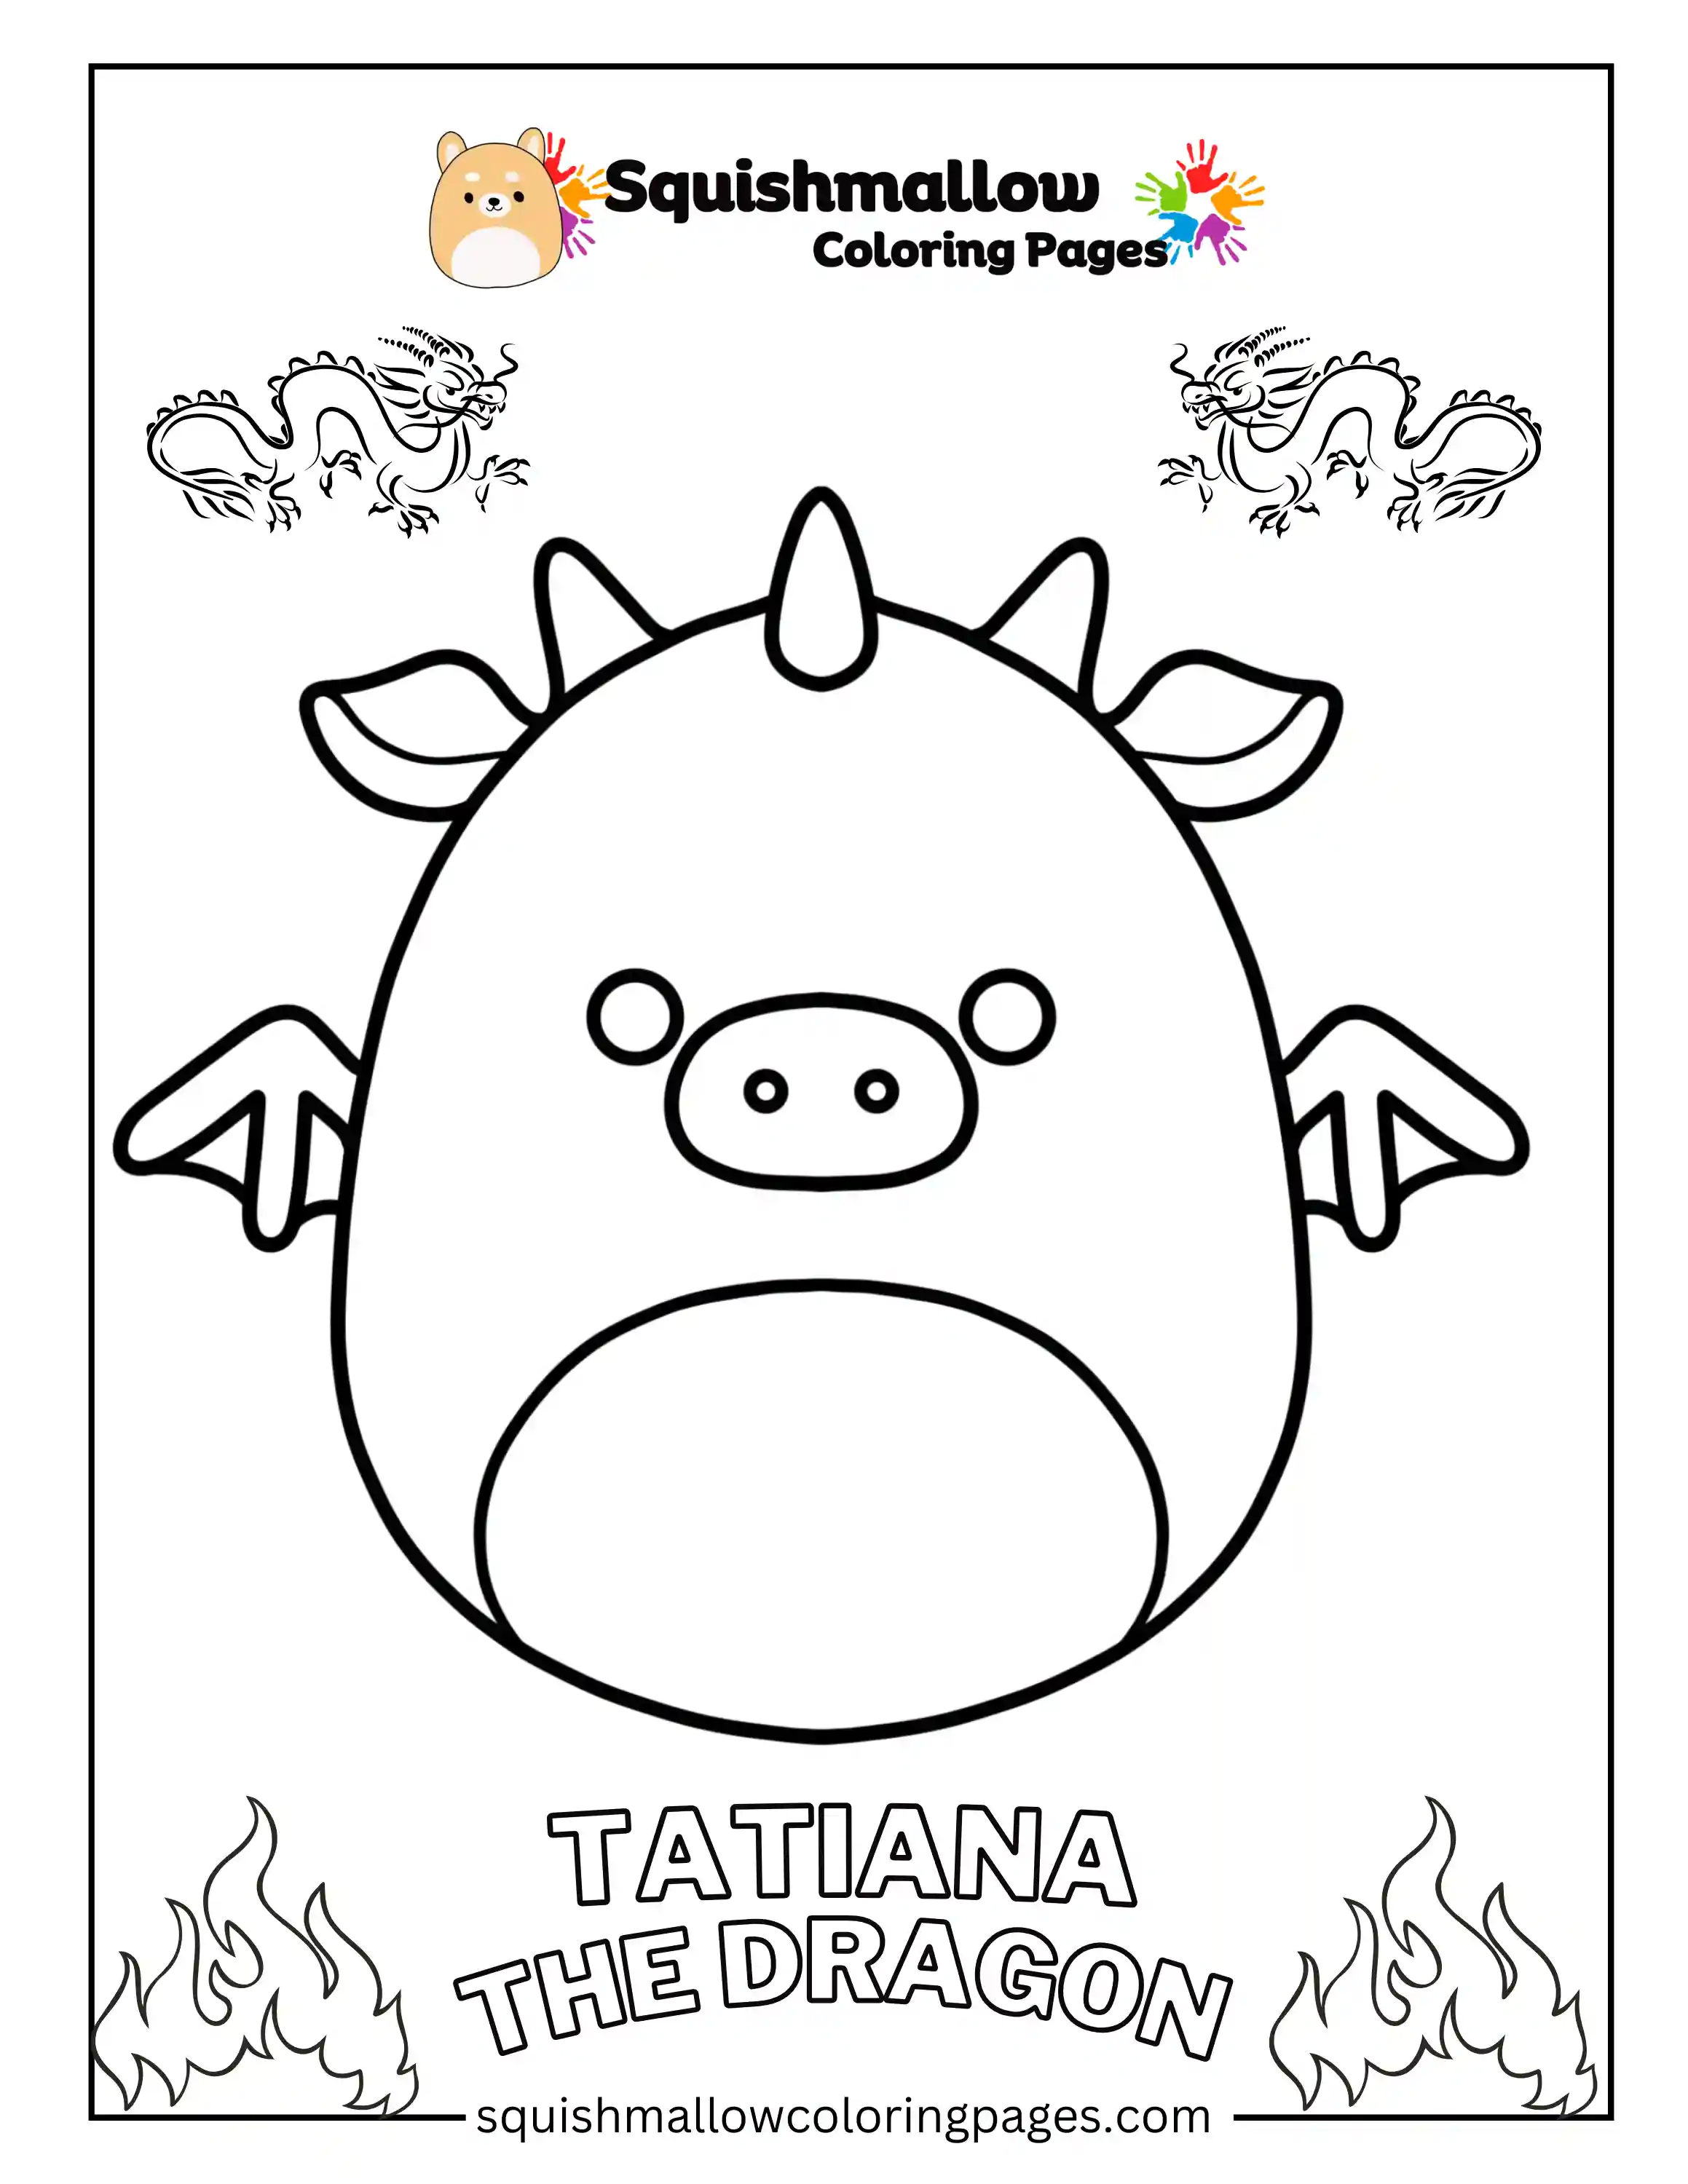 Tatiana The Dragon Squishmallow Coloring Pages